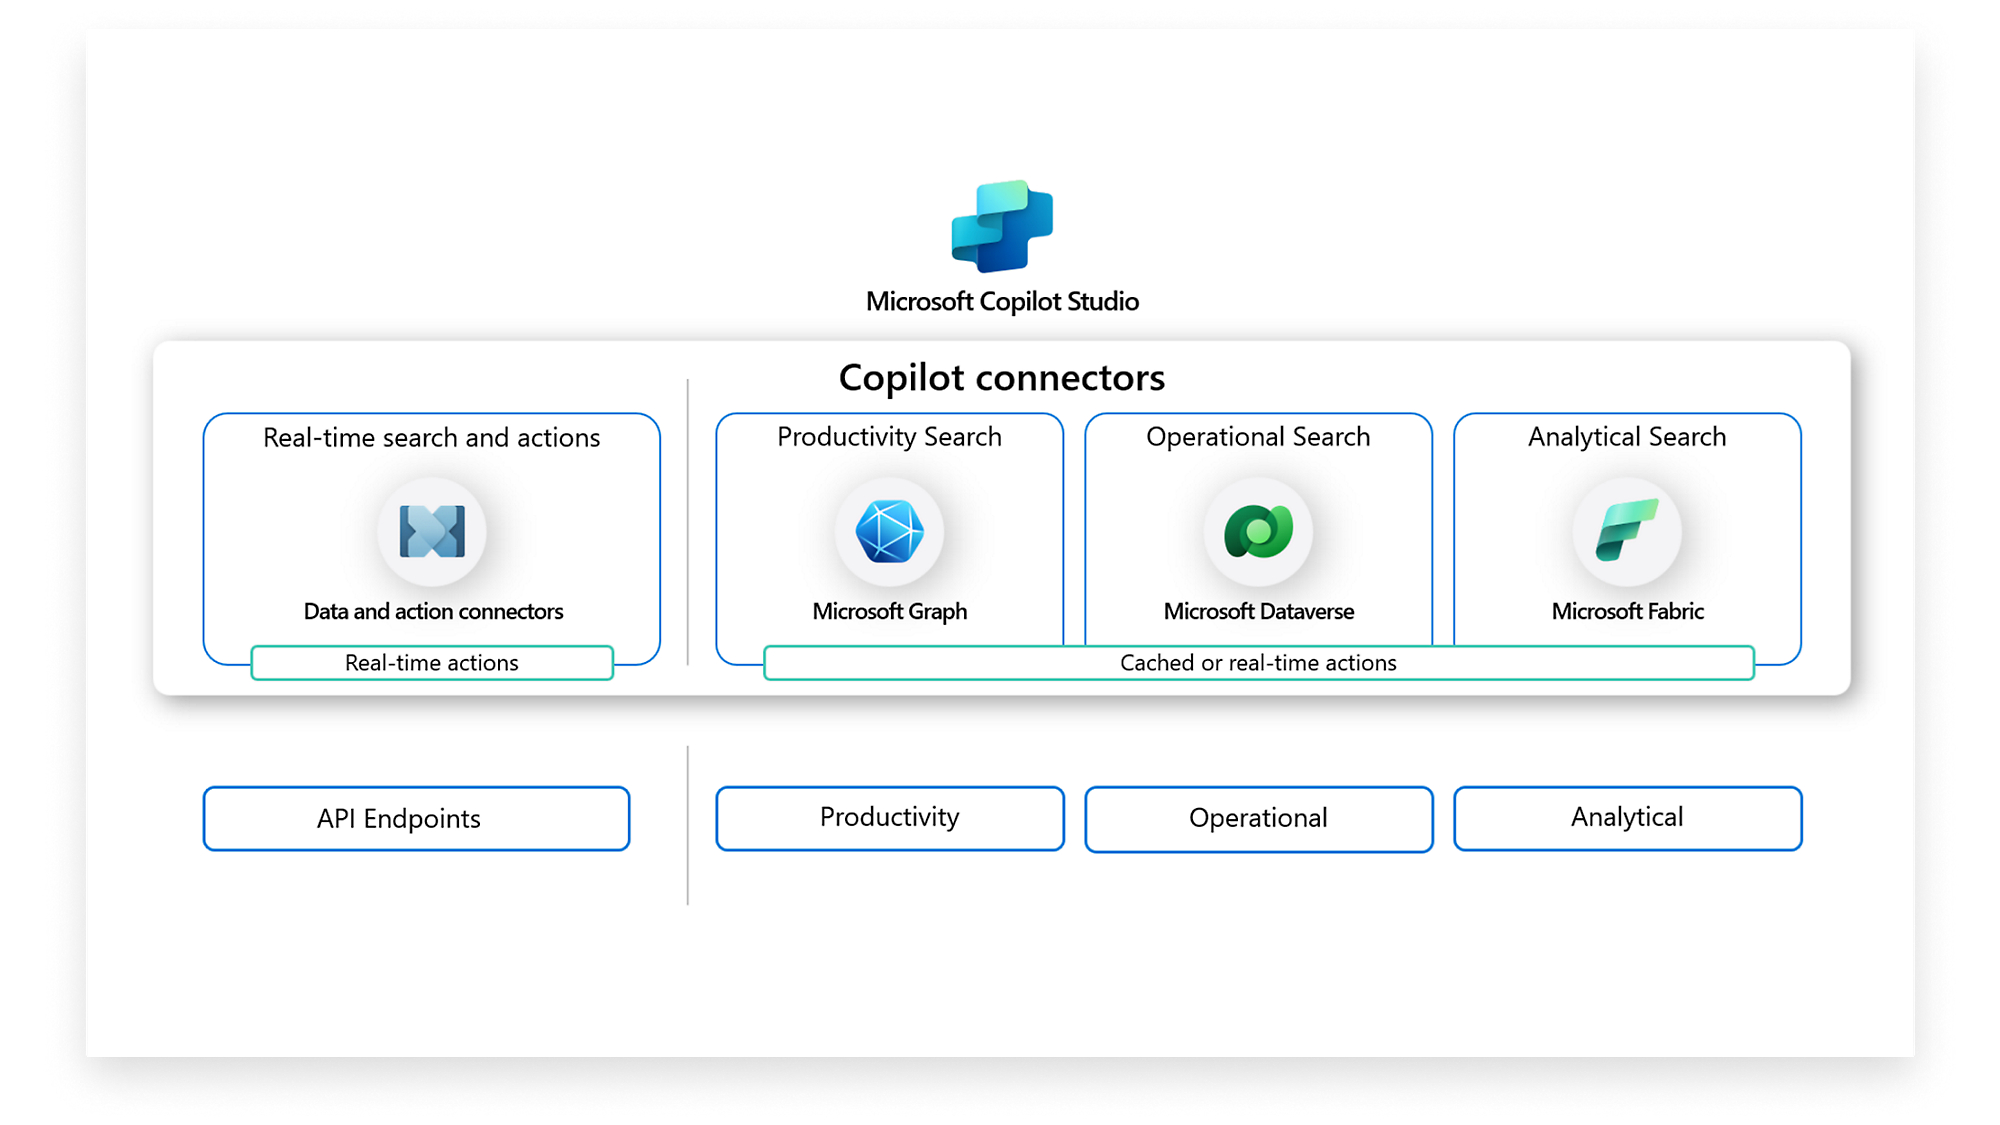 Microsoft Copilot Studio, connectors, real-time search data connectors, productivity, operational, analytical features